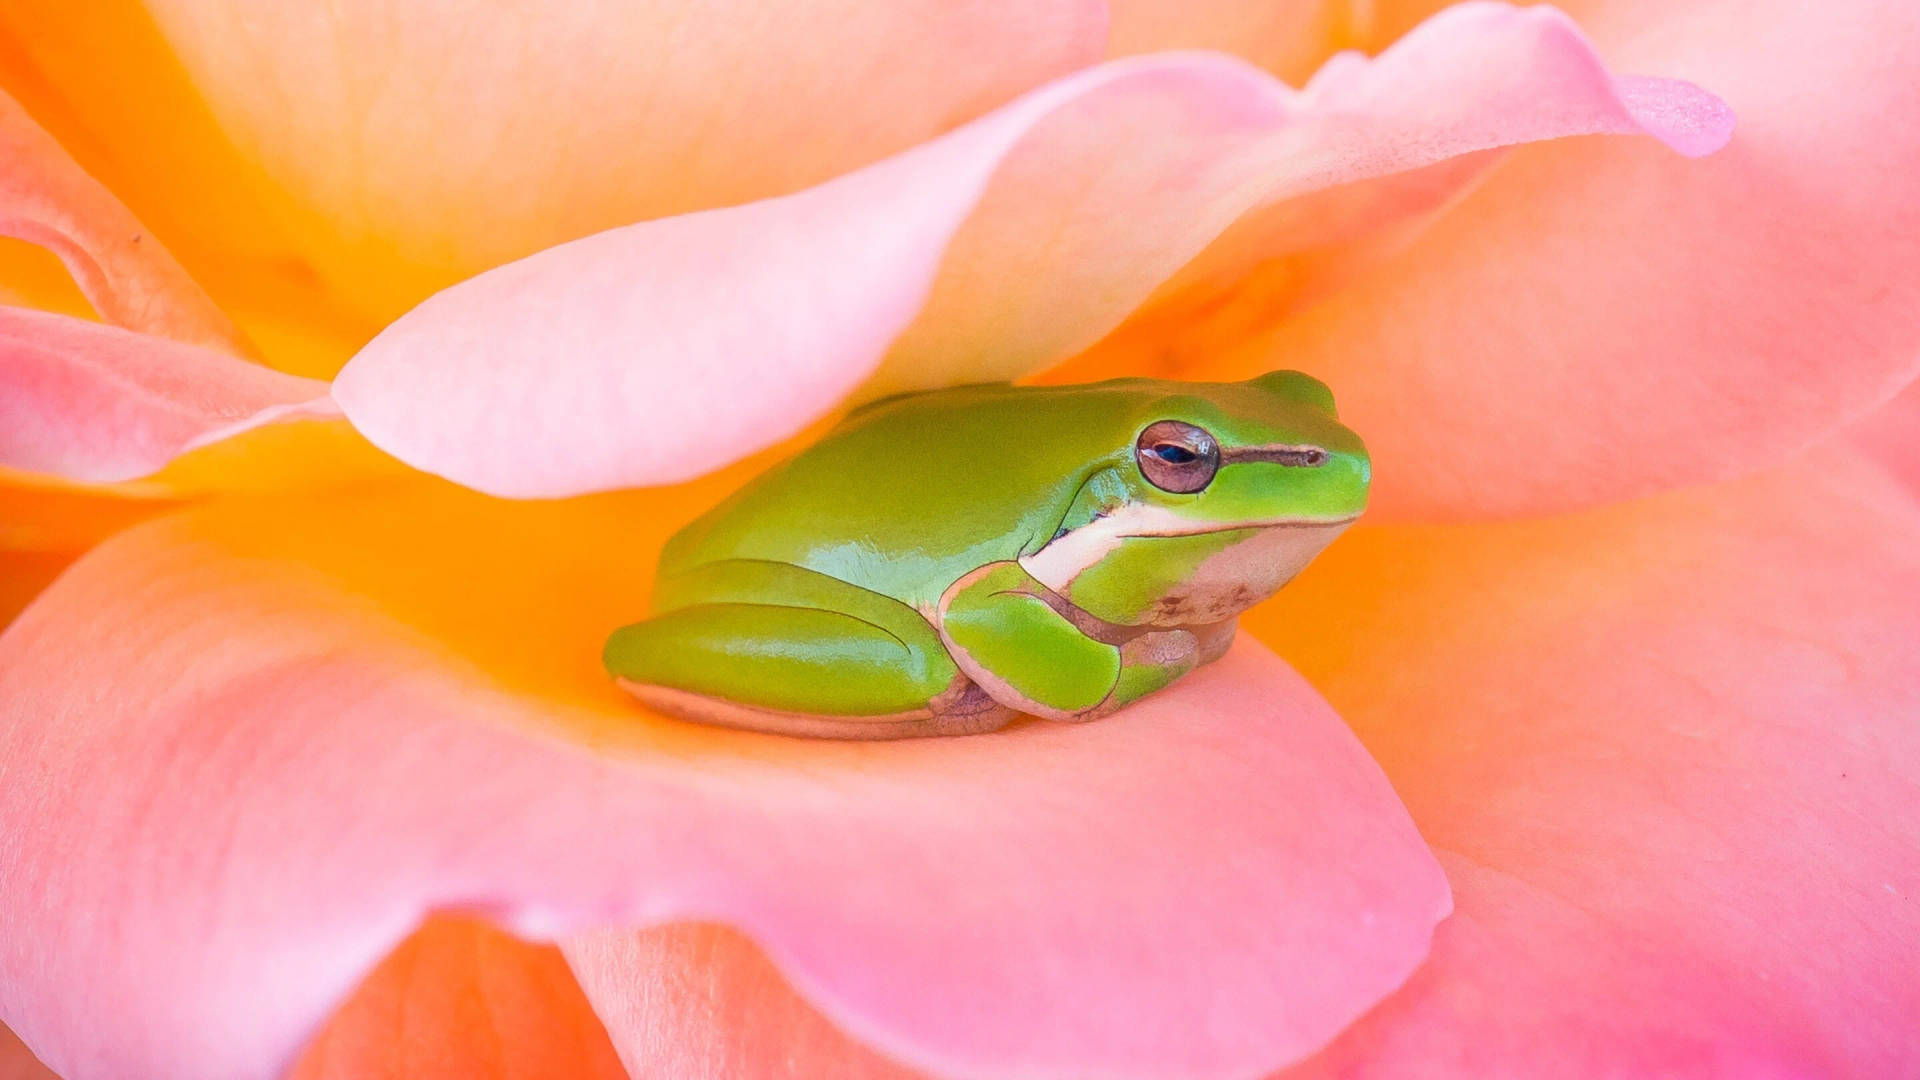 Kawaii Frog In A Pink Flower Background